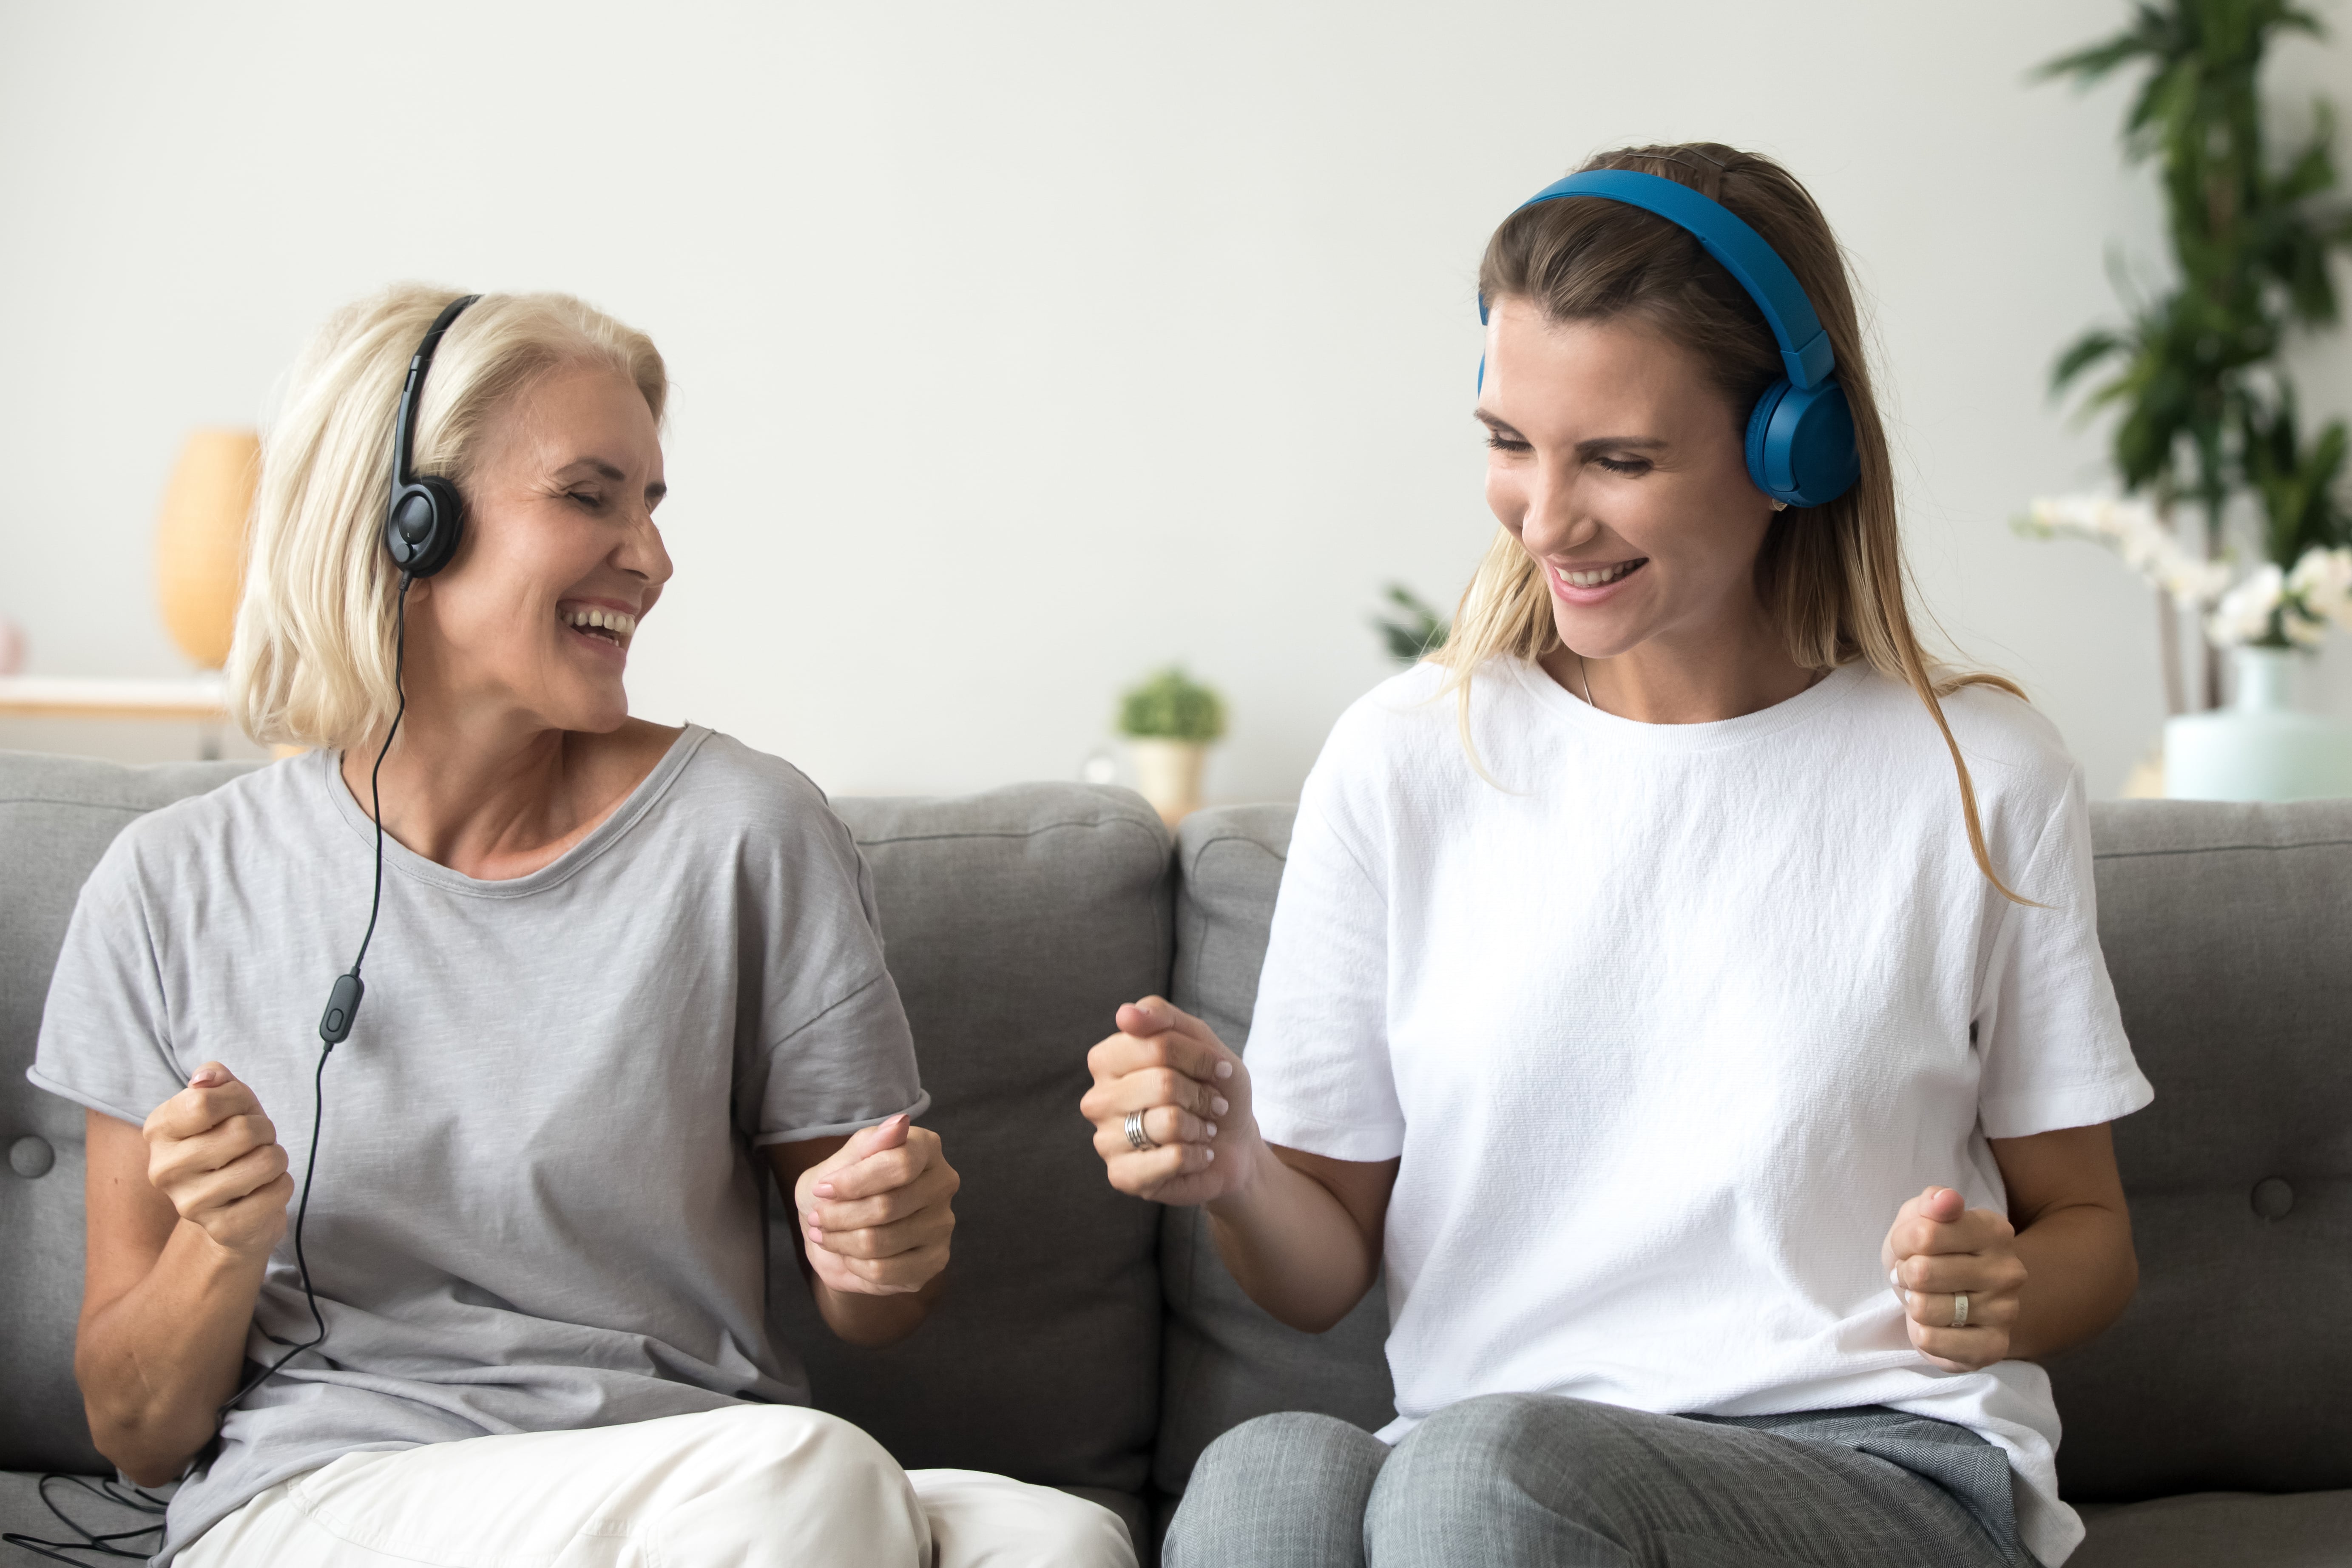 An older adult listening to music together with a caregiver